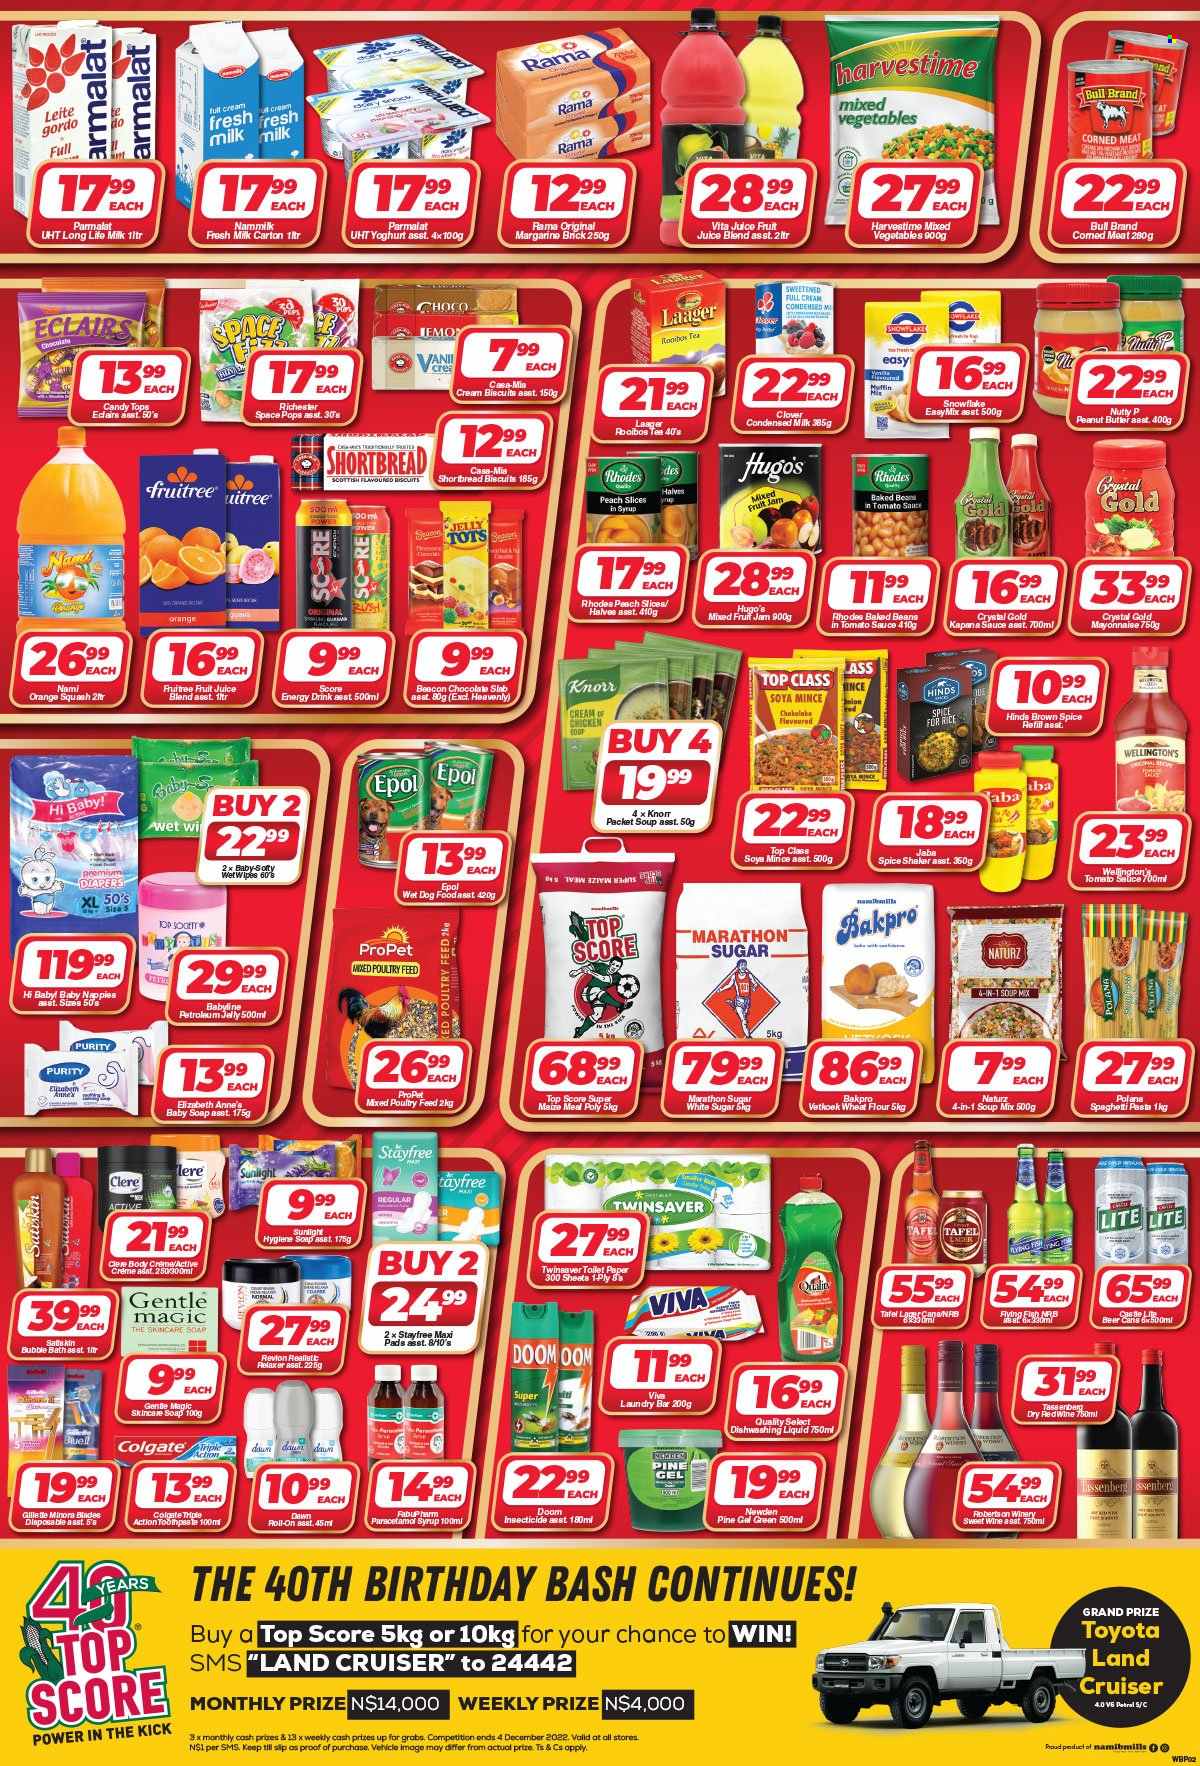 thumbnail - Woermann Brock catalogue  - 23/11/2022 - 06/12/2022 - Sales products - beans, spaghetti, chicken soup, soup mix, soup, pasta, Knorr, chakalaka, yoghurt, Clover, Parmalat, milk, long life milk, condensed milk, margarine, Rama, mayonnaise, mixed vegetables, Harvestime, chocolate, biscuit, flour, sugar, wheat flour, maize meal, soya mince, corned meat, baked beans, spice, Hinds, fruit jam, peanut butter, energy drink, fruit juice, juice, orange squash, tea, rooibos tea, beer, Purity, wipes, nappies, toilet paper, laundry soap bar, Sunlight, dishwashing liquid, bubble bath, soap, Colgate, toothpaste, Stayfree, sanitary pads, petroleum jelly, Gentle Magic, relaxer, Clere, Top Society, roll-on, Gillette. Page 2.